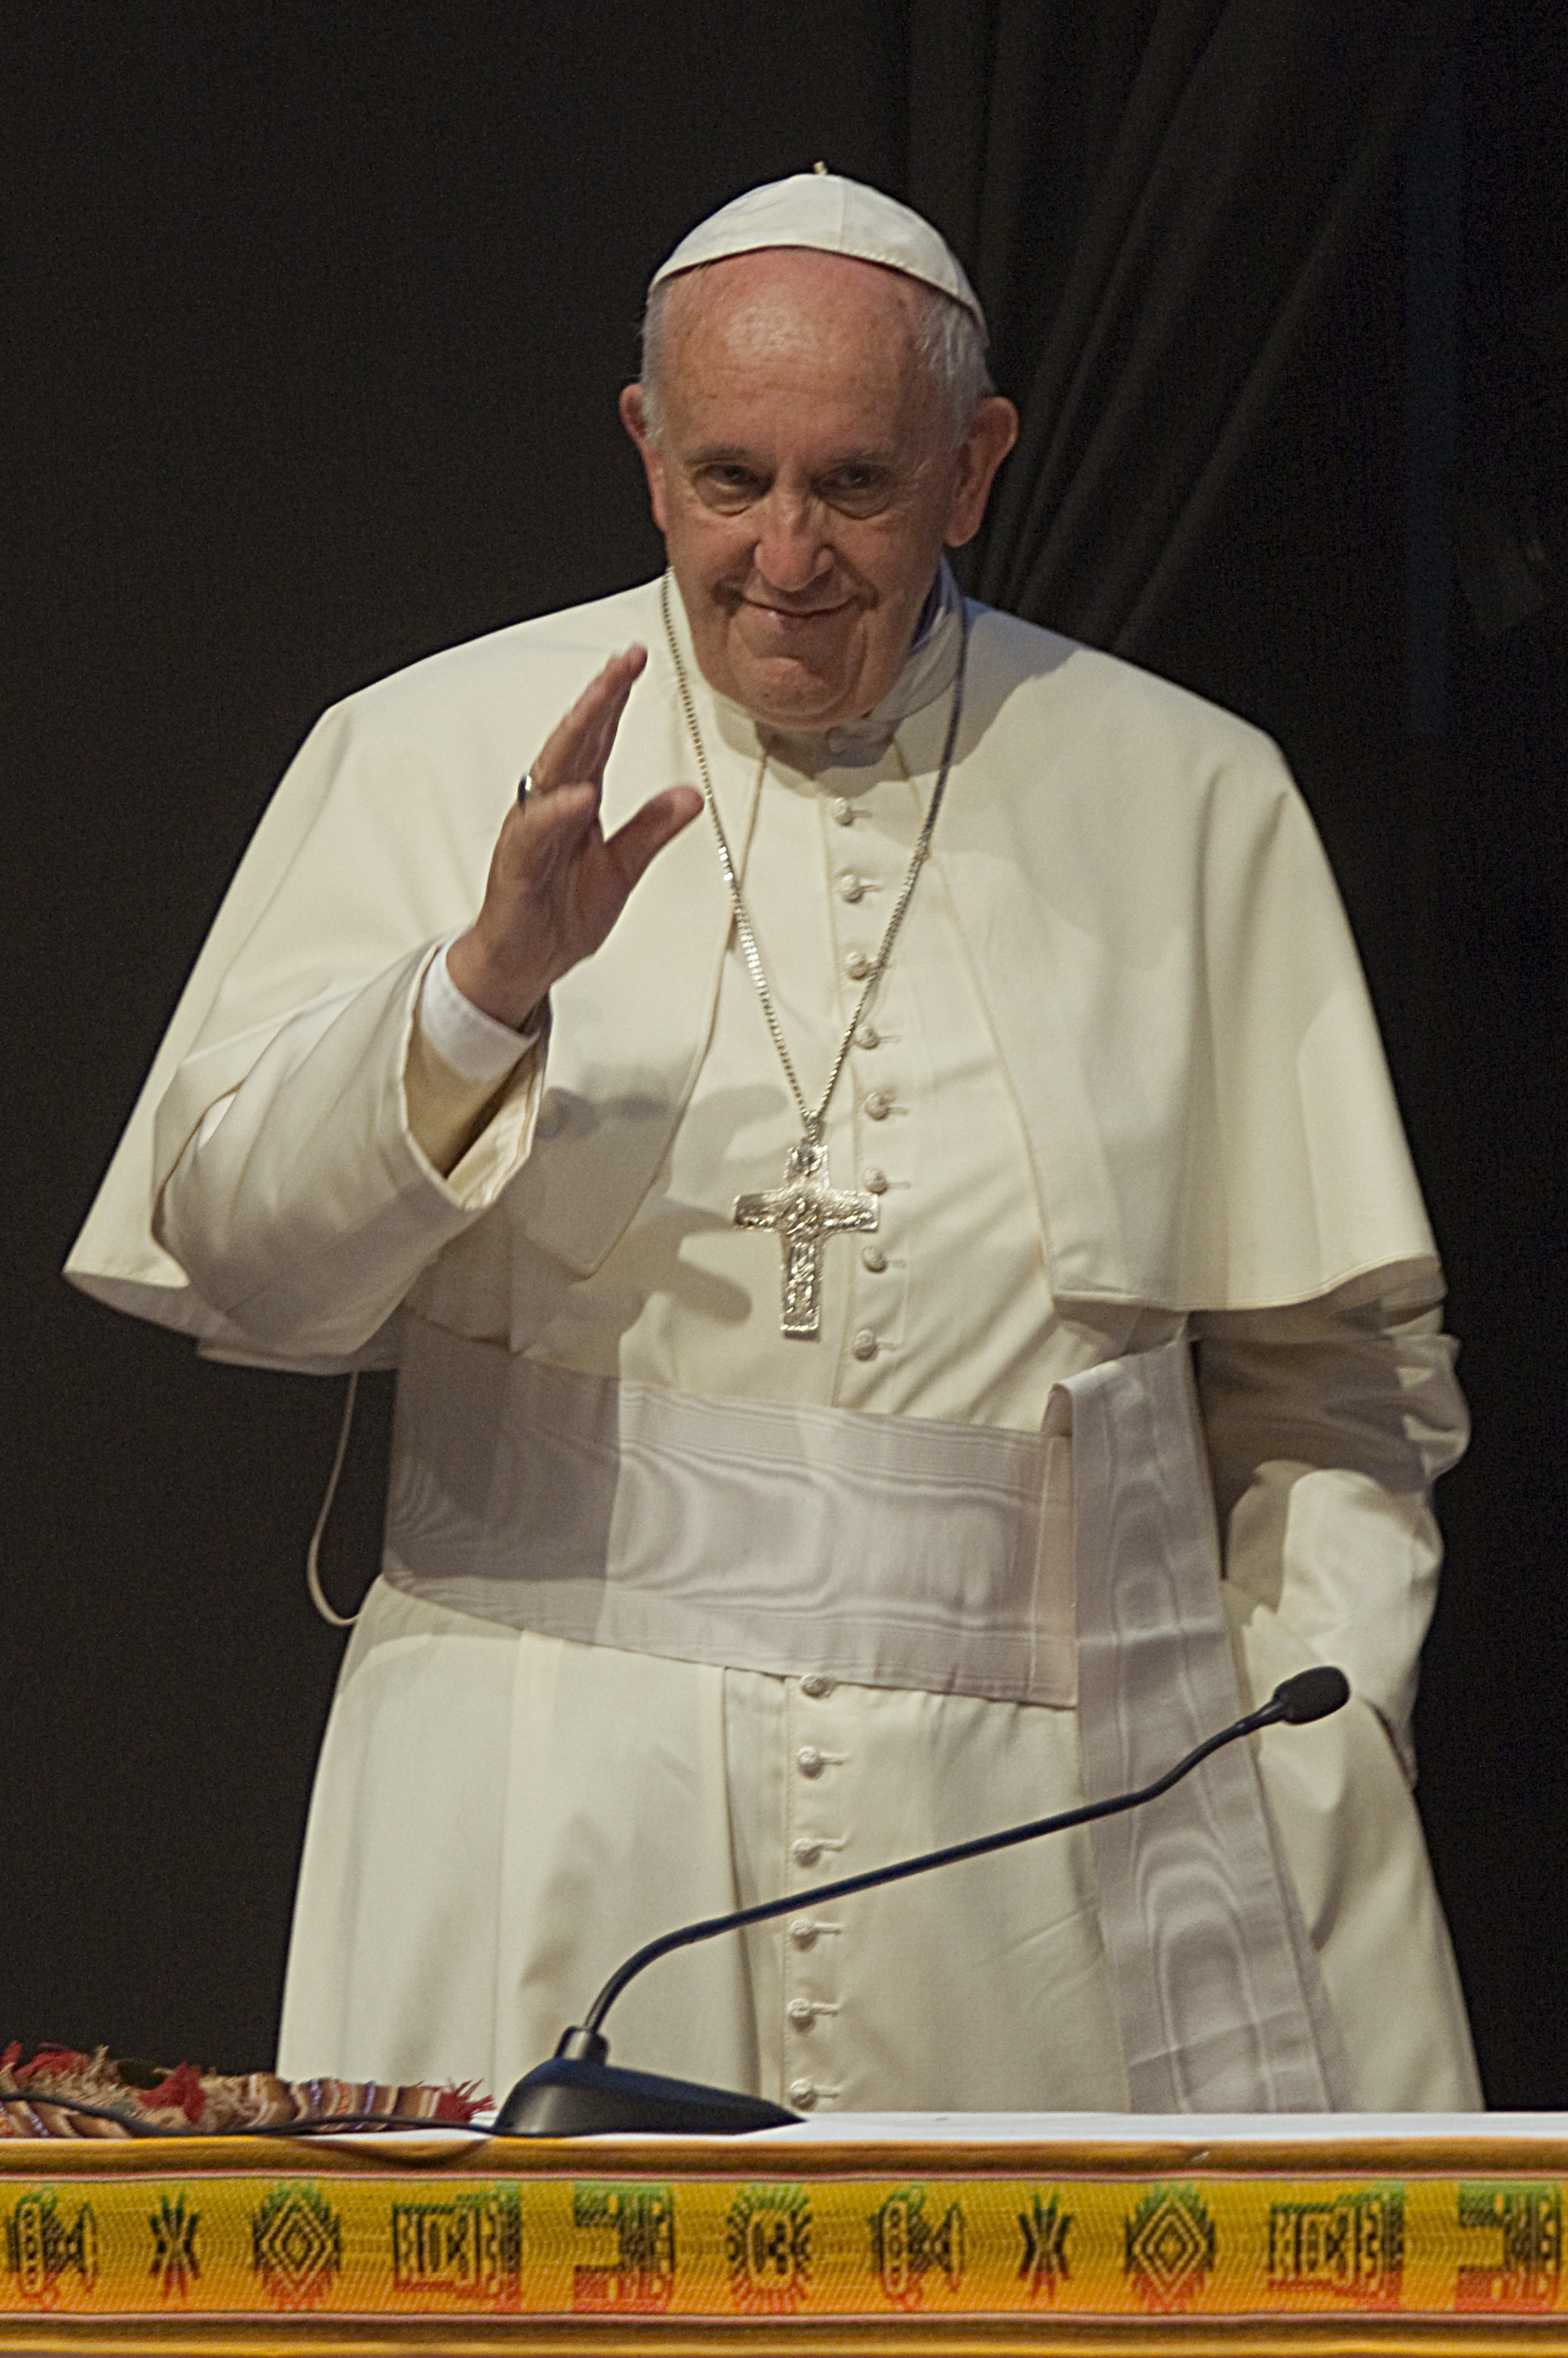 Pope Francis greets the attendees of a conference as part of the II Meeting of People's Movements in Santa Cruz, Bolivia, on on July 9, 2015. (Amanecer Tedesqui/CON—Getty Images)